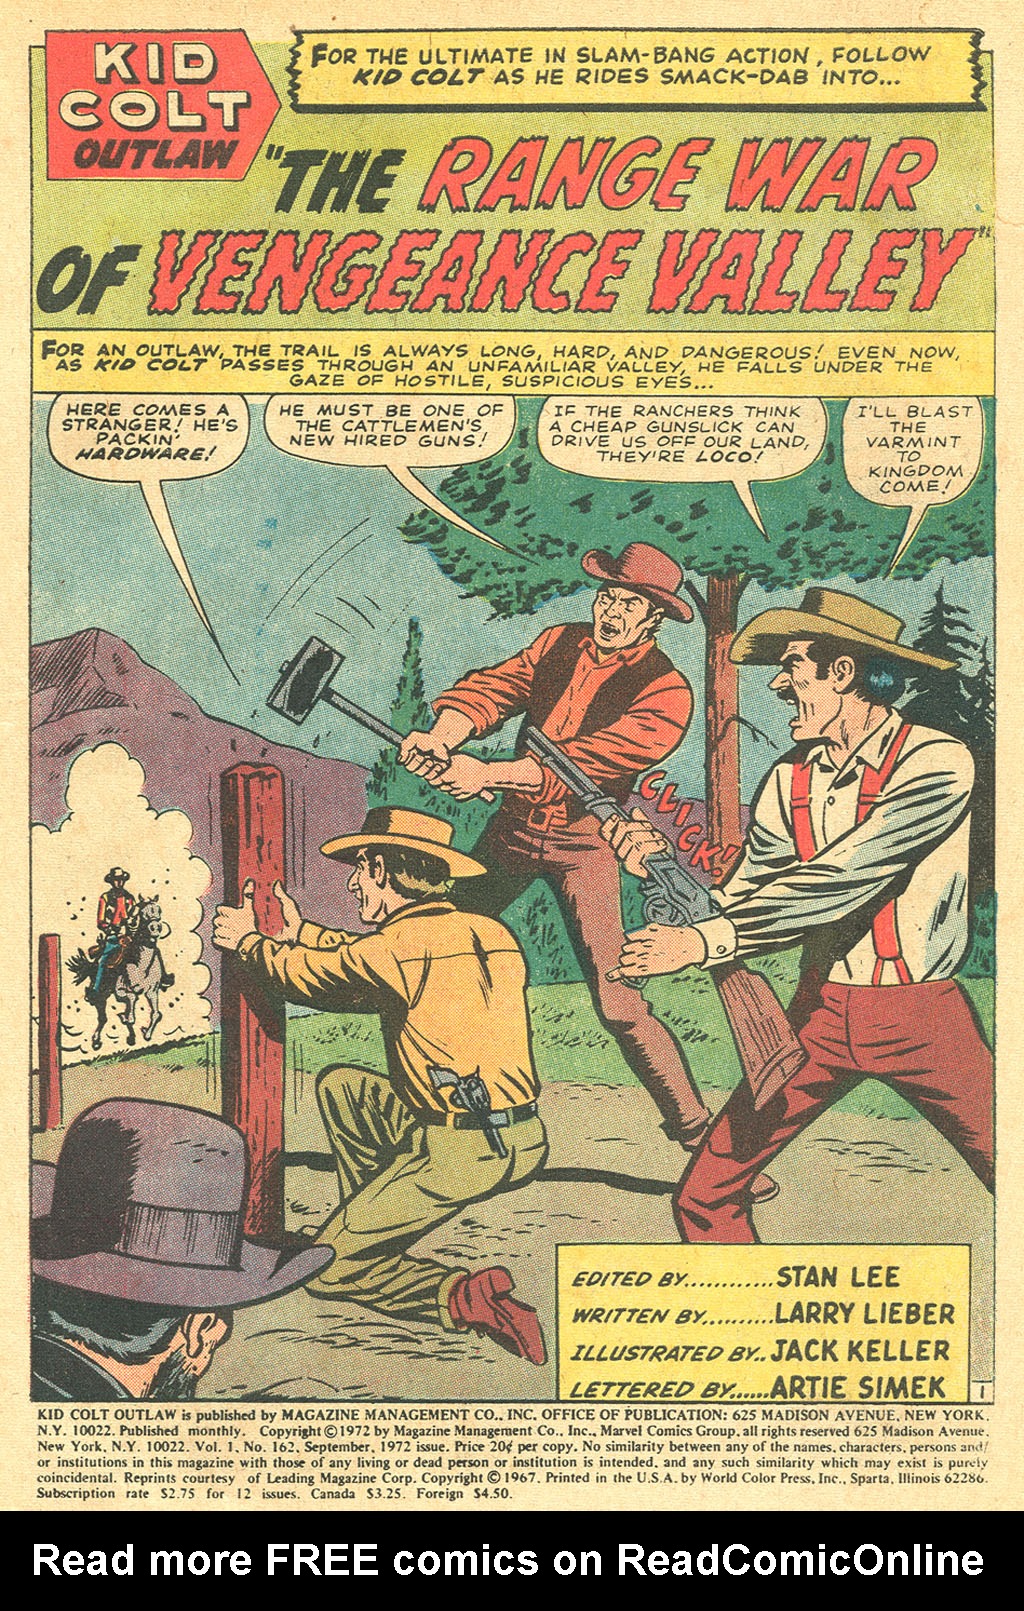 Read online Kid Colt Outlaw comic -  Issue #162 - 3